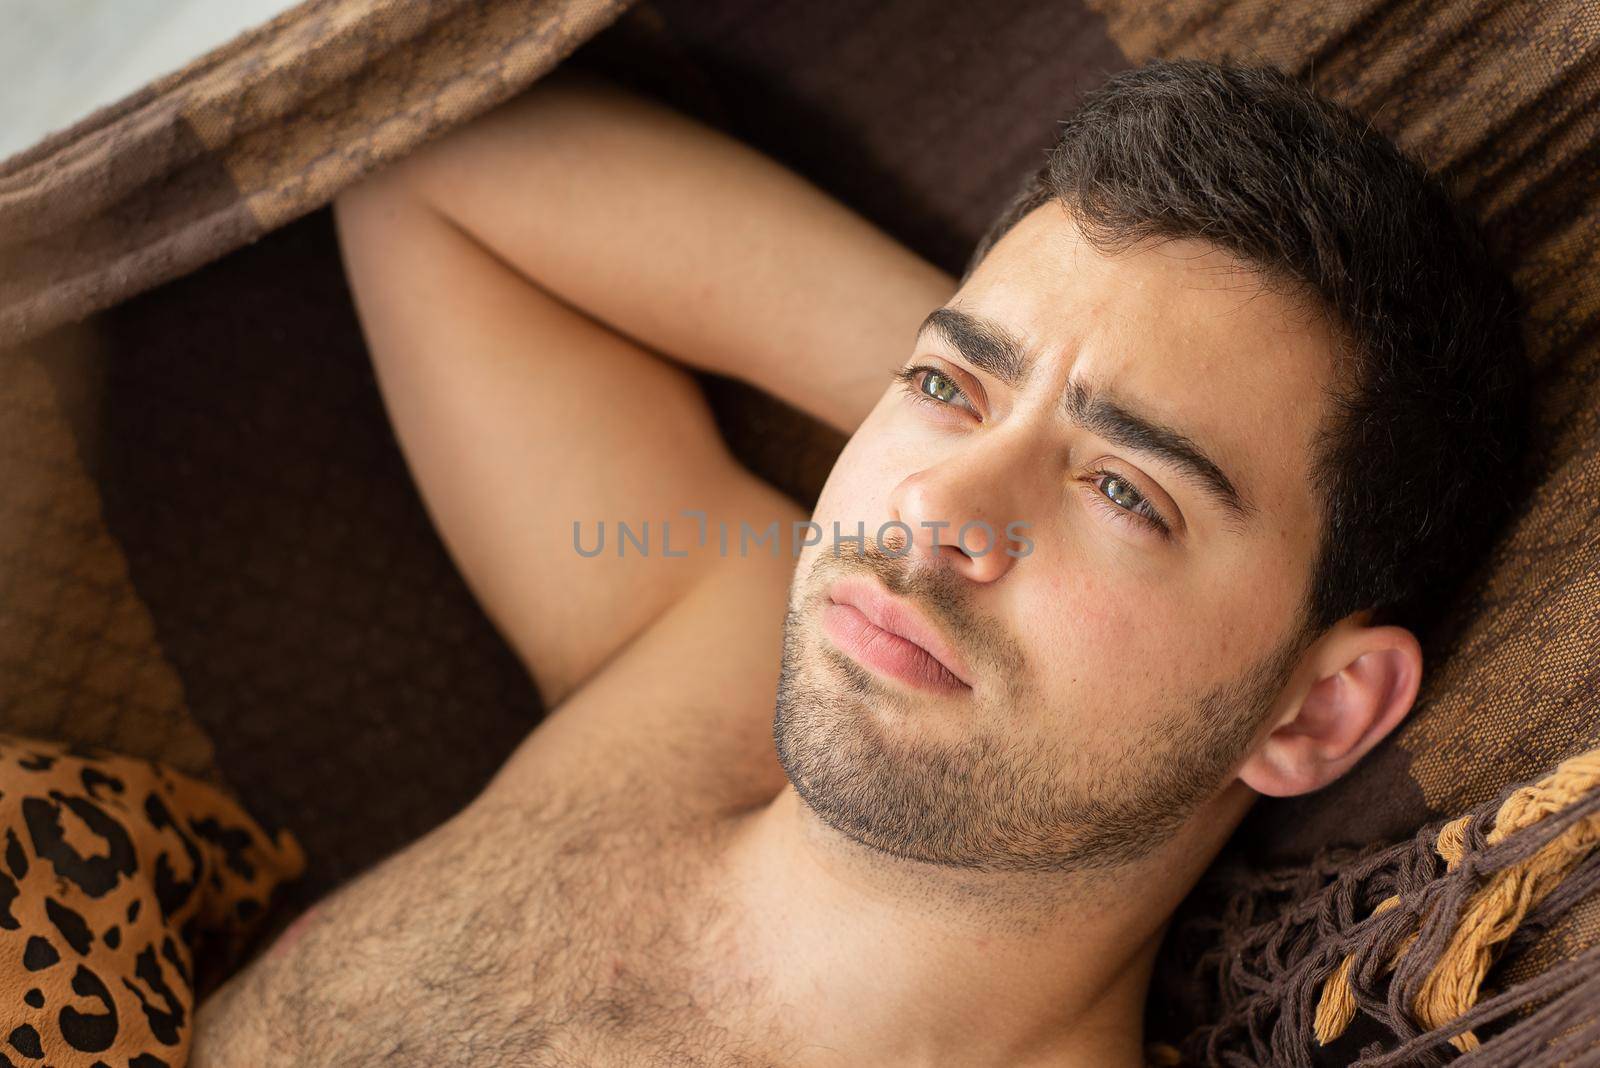 Dark haired bare chested unshaven young man resting in a brown hammock by Pendleton